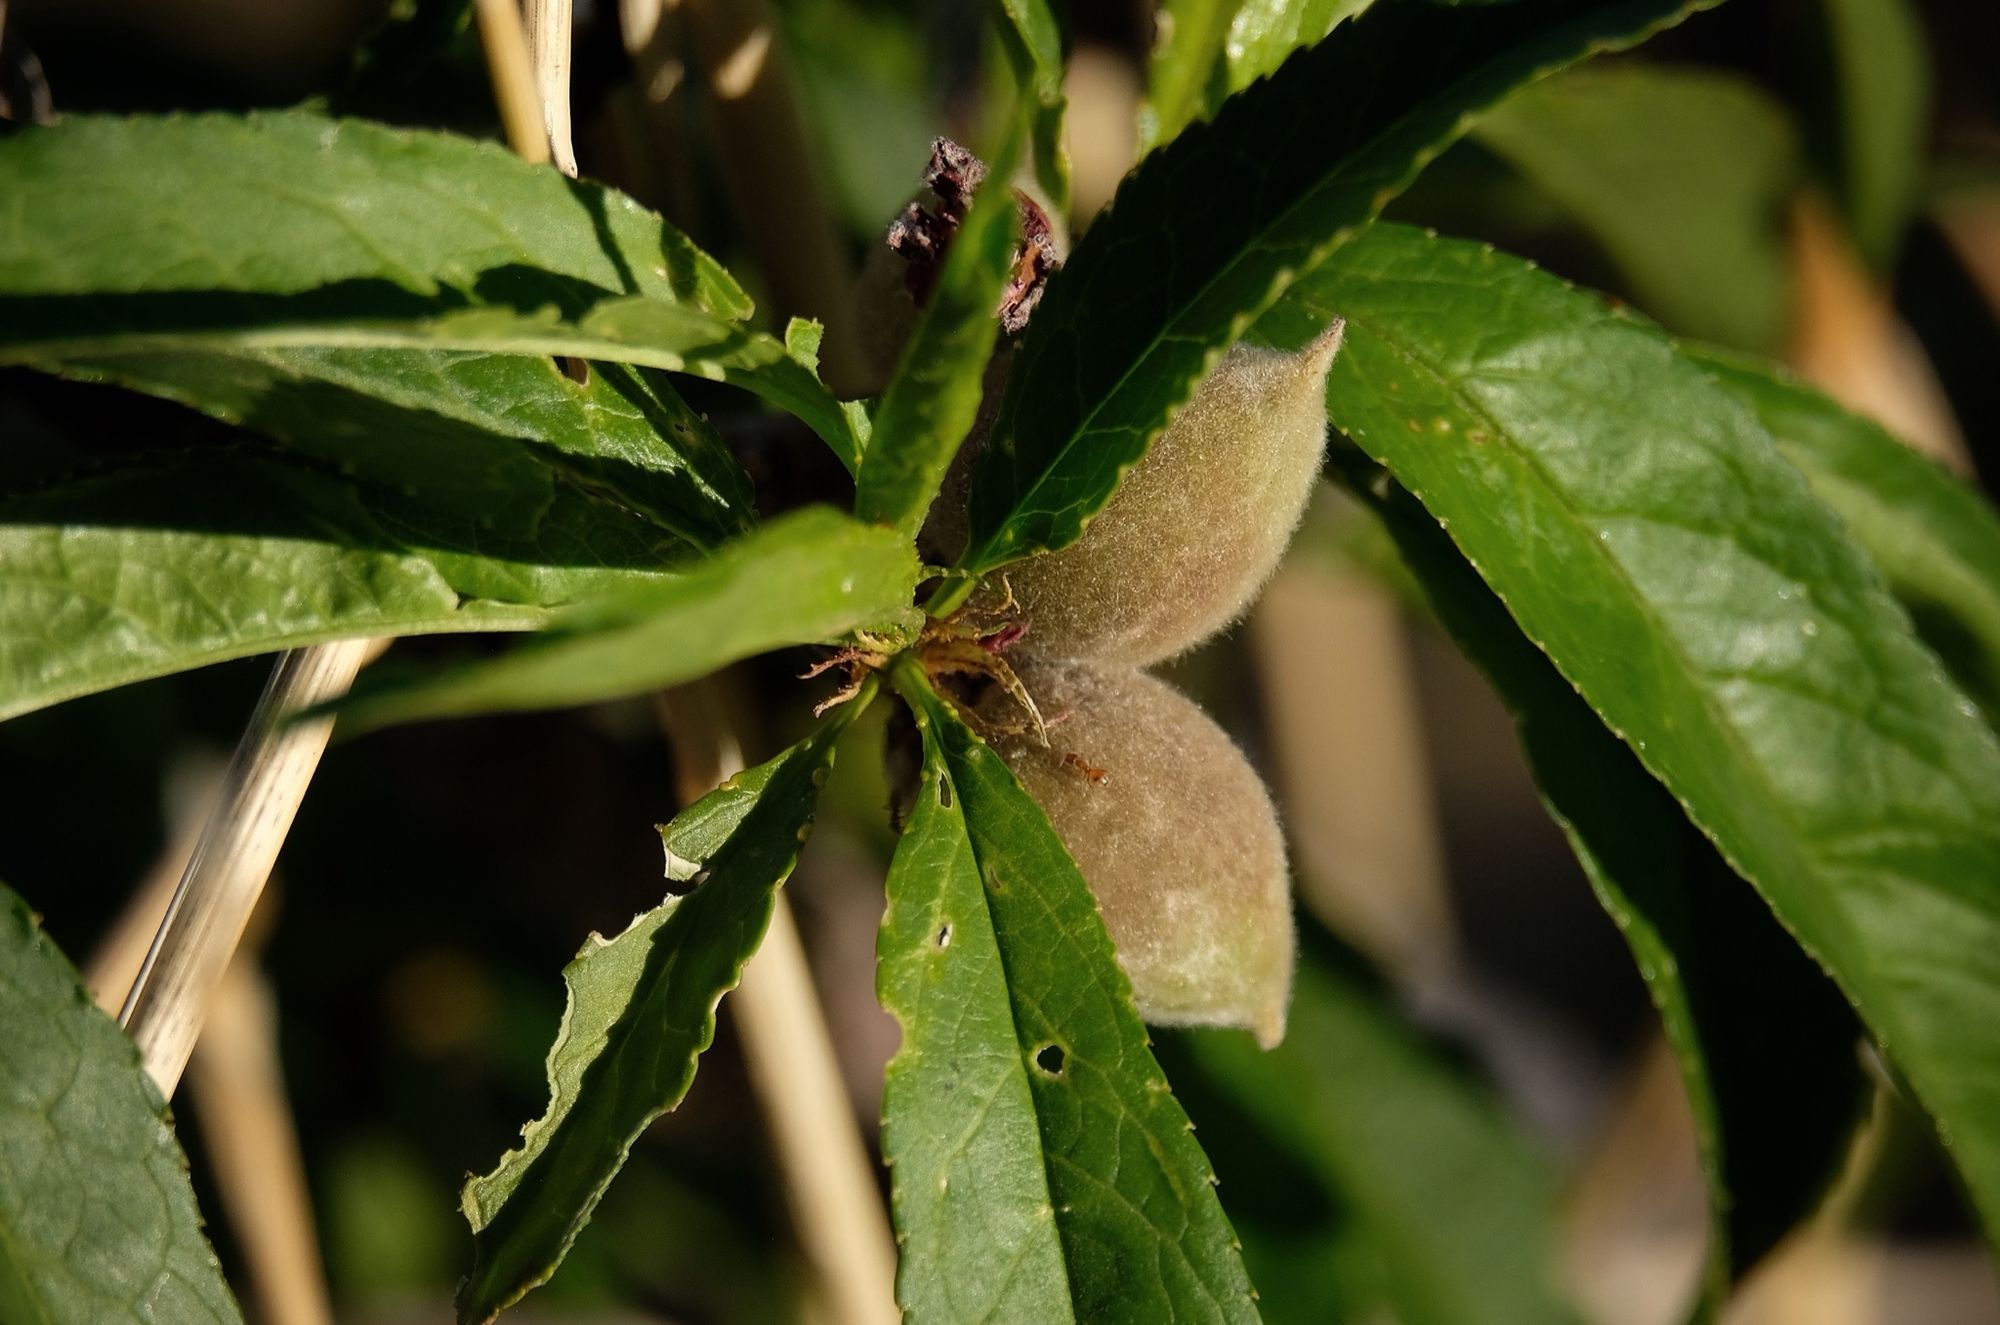 a close up image of two tiny fuzzy baby peaches, surrounded by green leaves